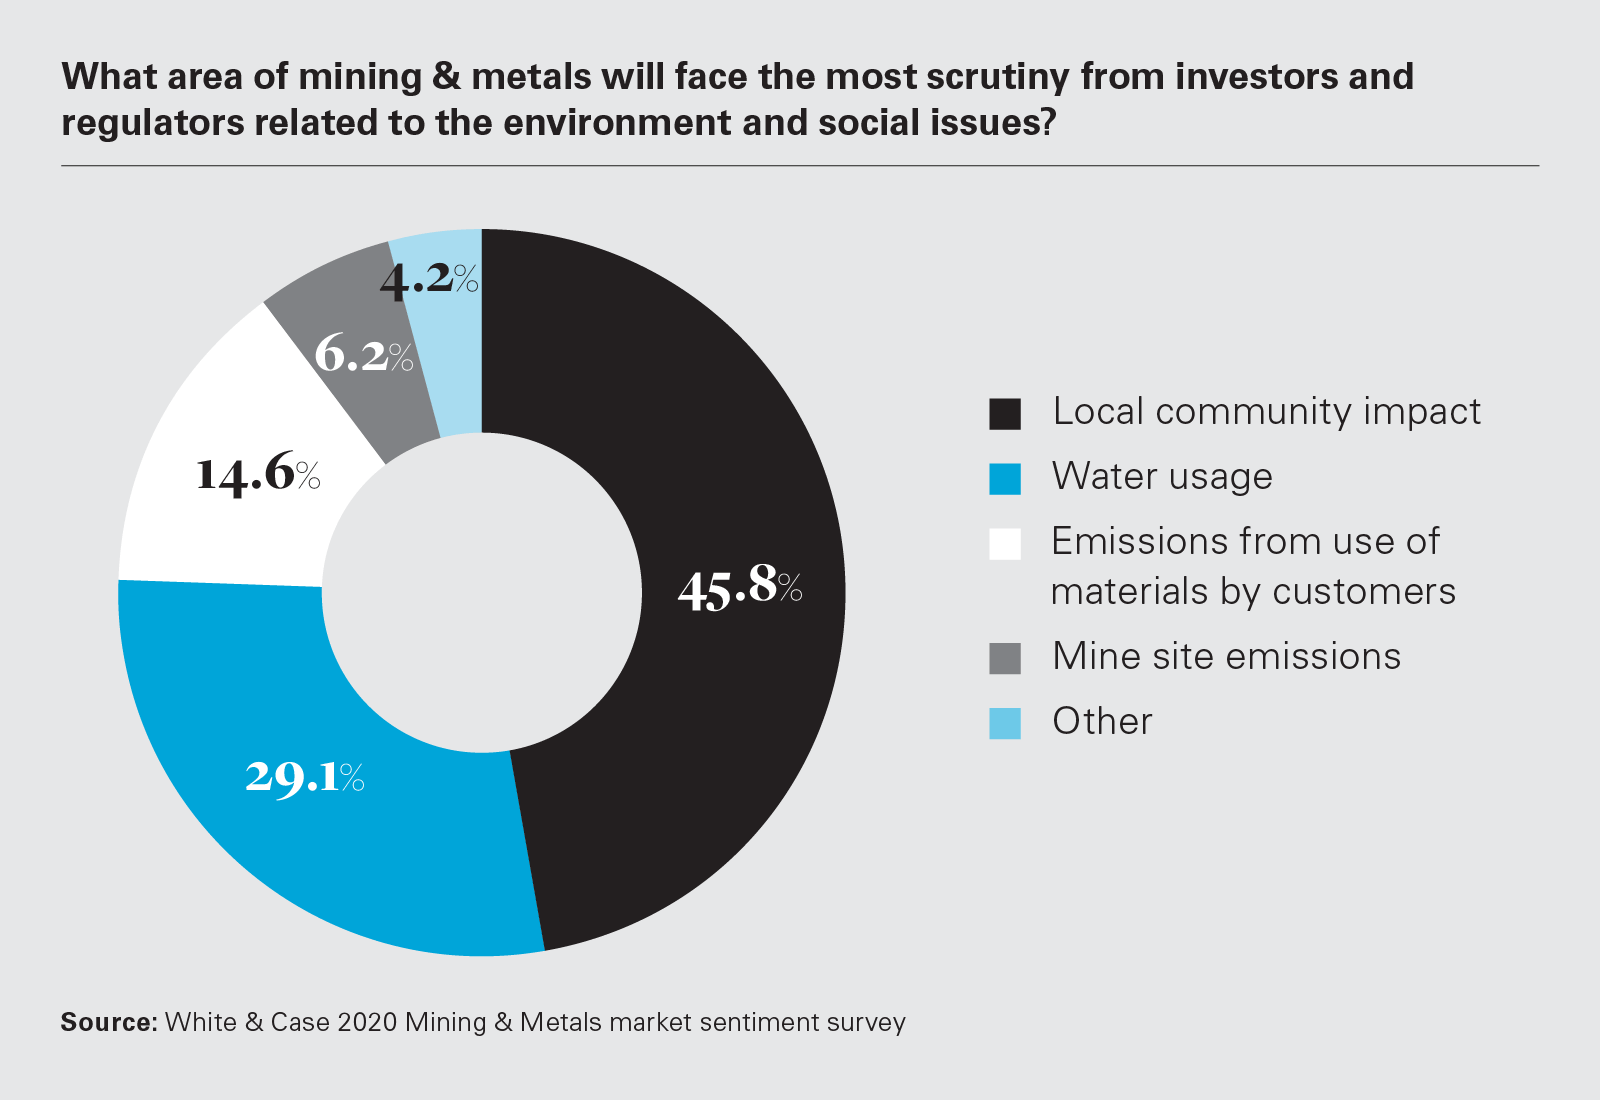 What area of mining & metals will face the most scrutiny from investors and regulators related to the environment and social issues?